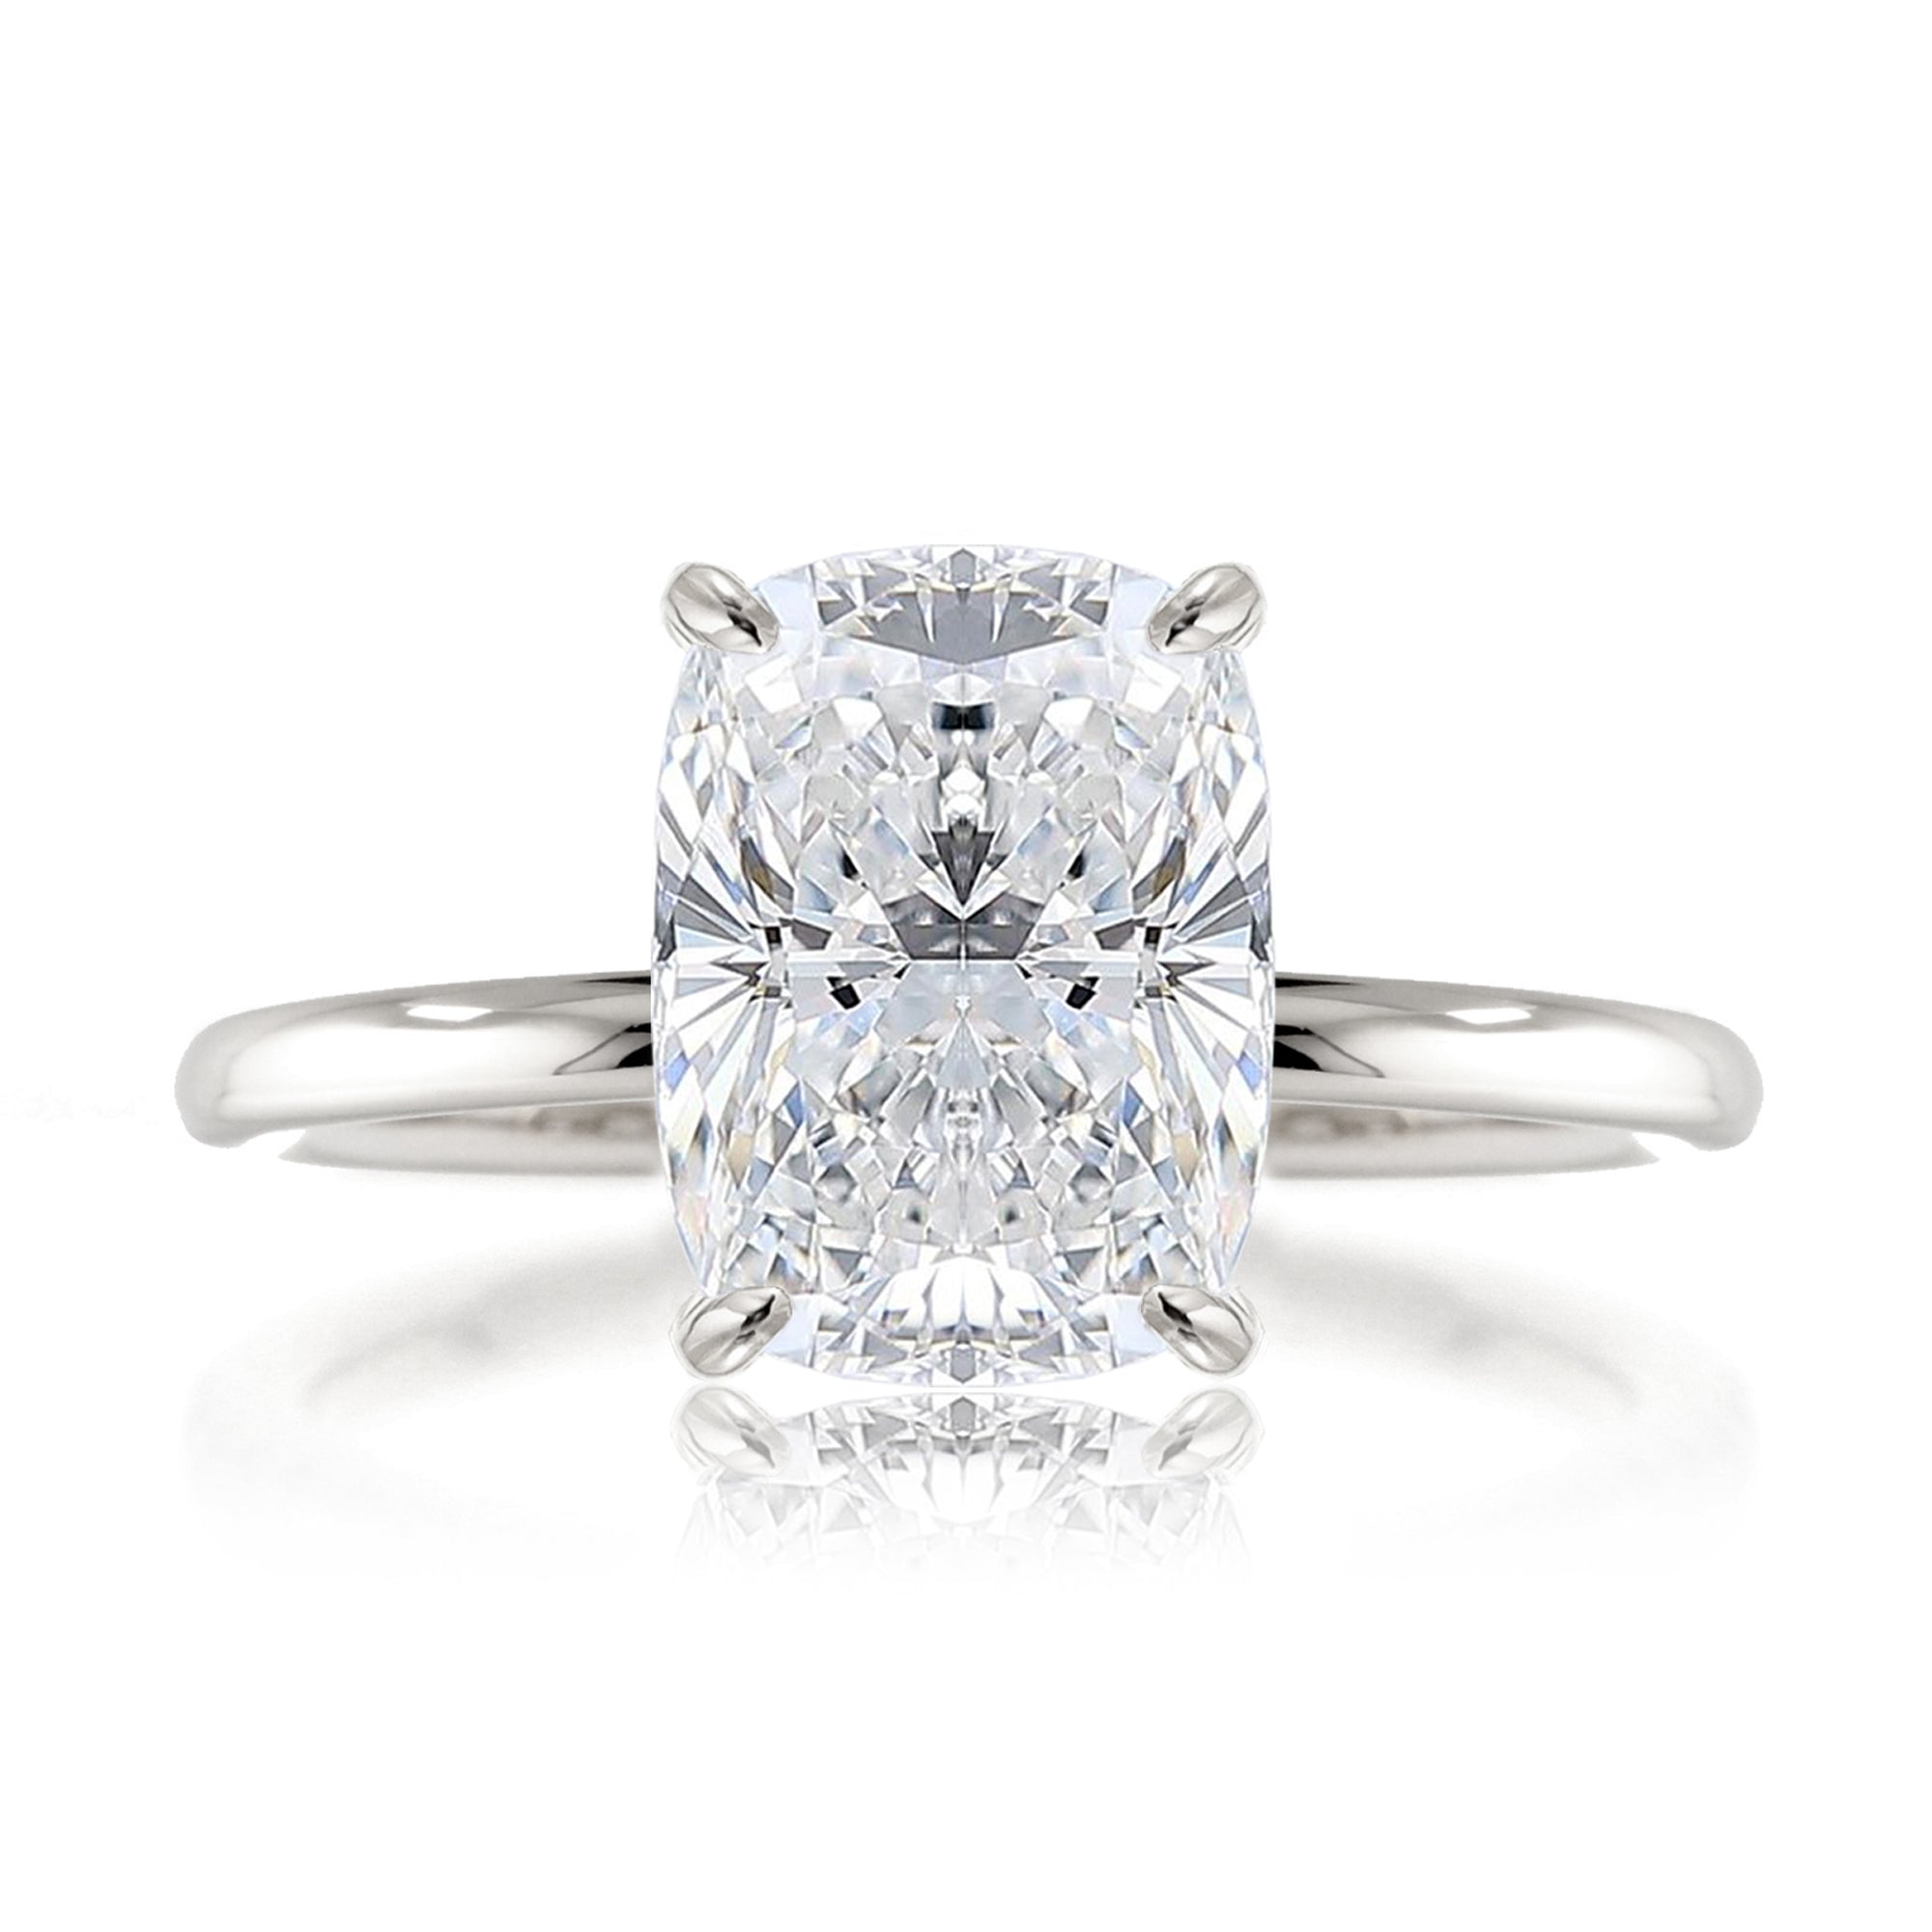 Cushion cut lab-grown diamond engagement ring white gold - The Ava solid band